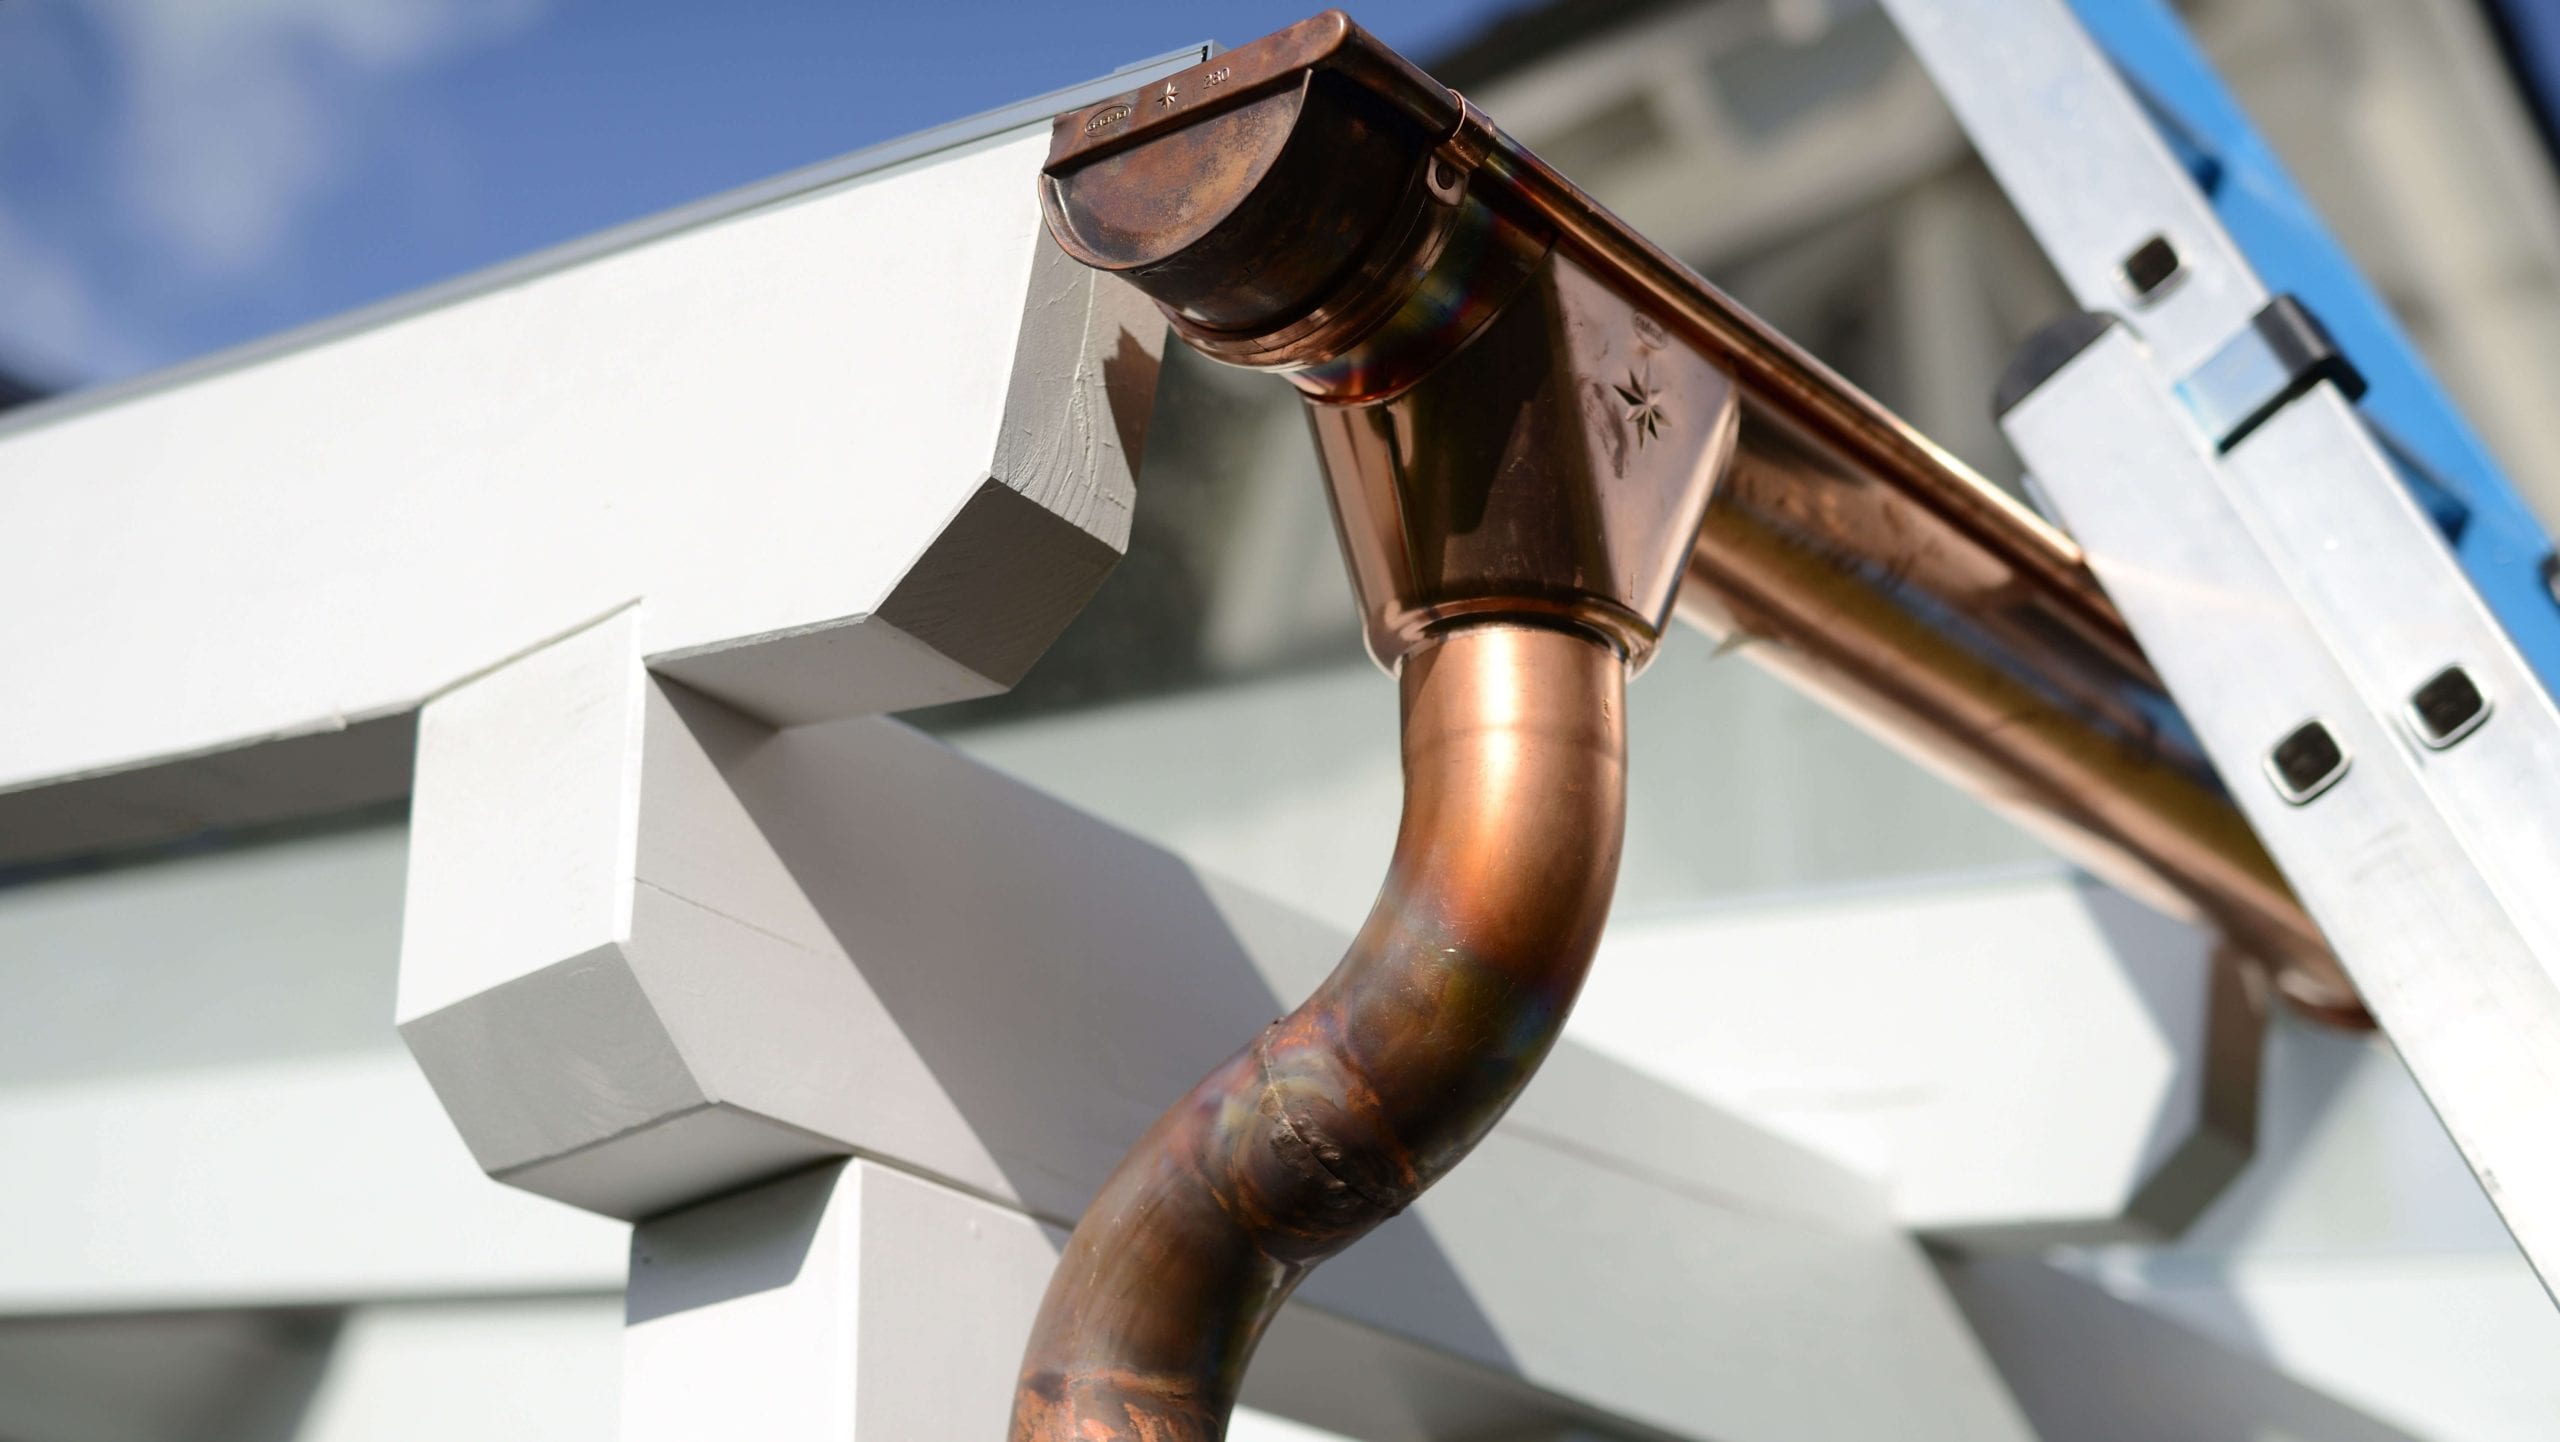 Make your property stand out with copper gutters. Contact for gutter installation in Concord